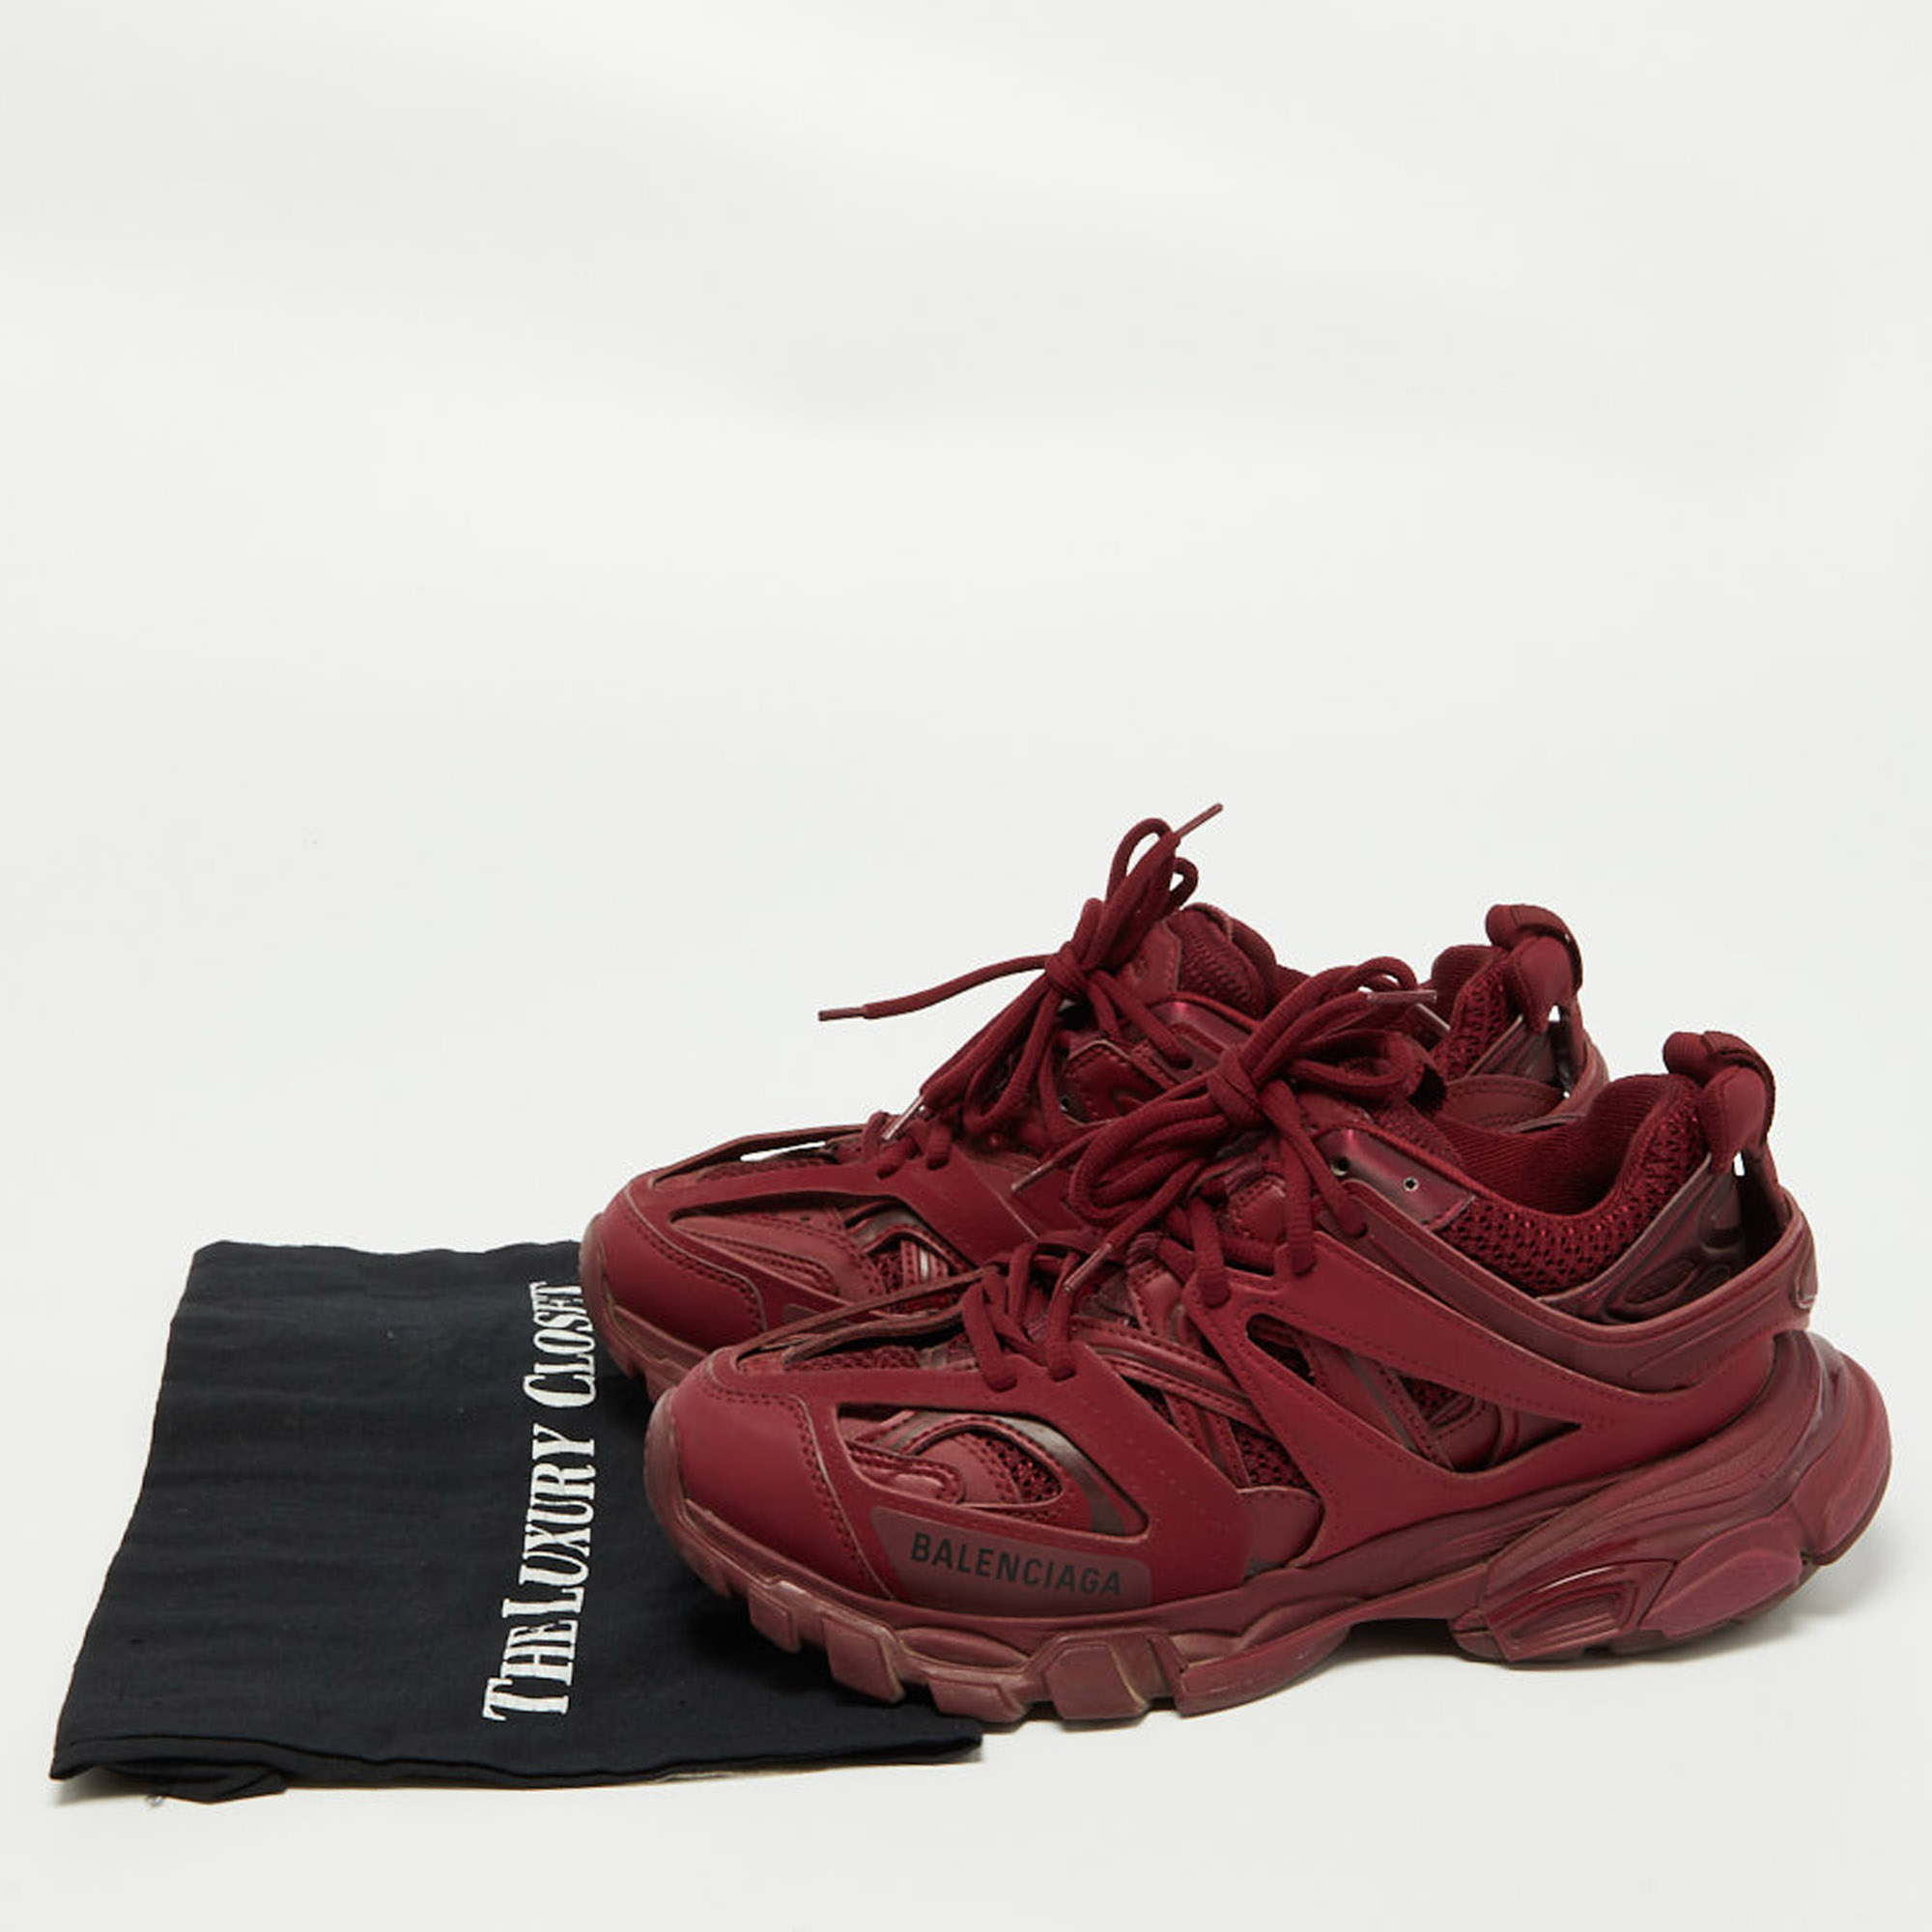 Balenciaga Burgundy Mesh And Leather Track Sneakers Size 38